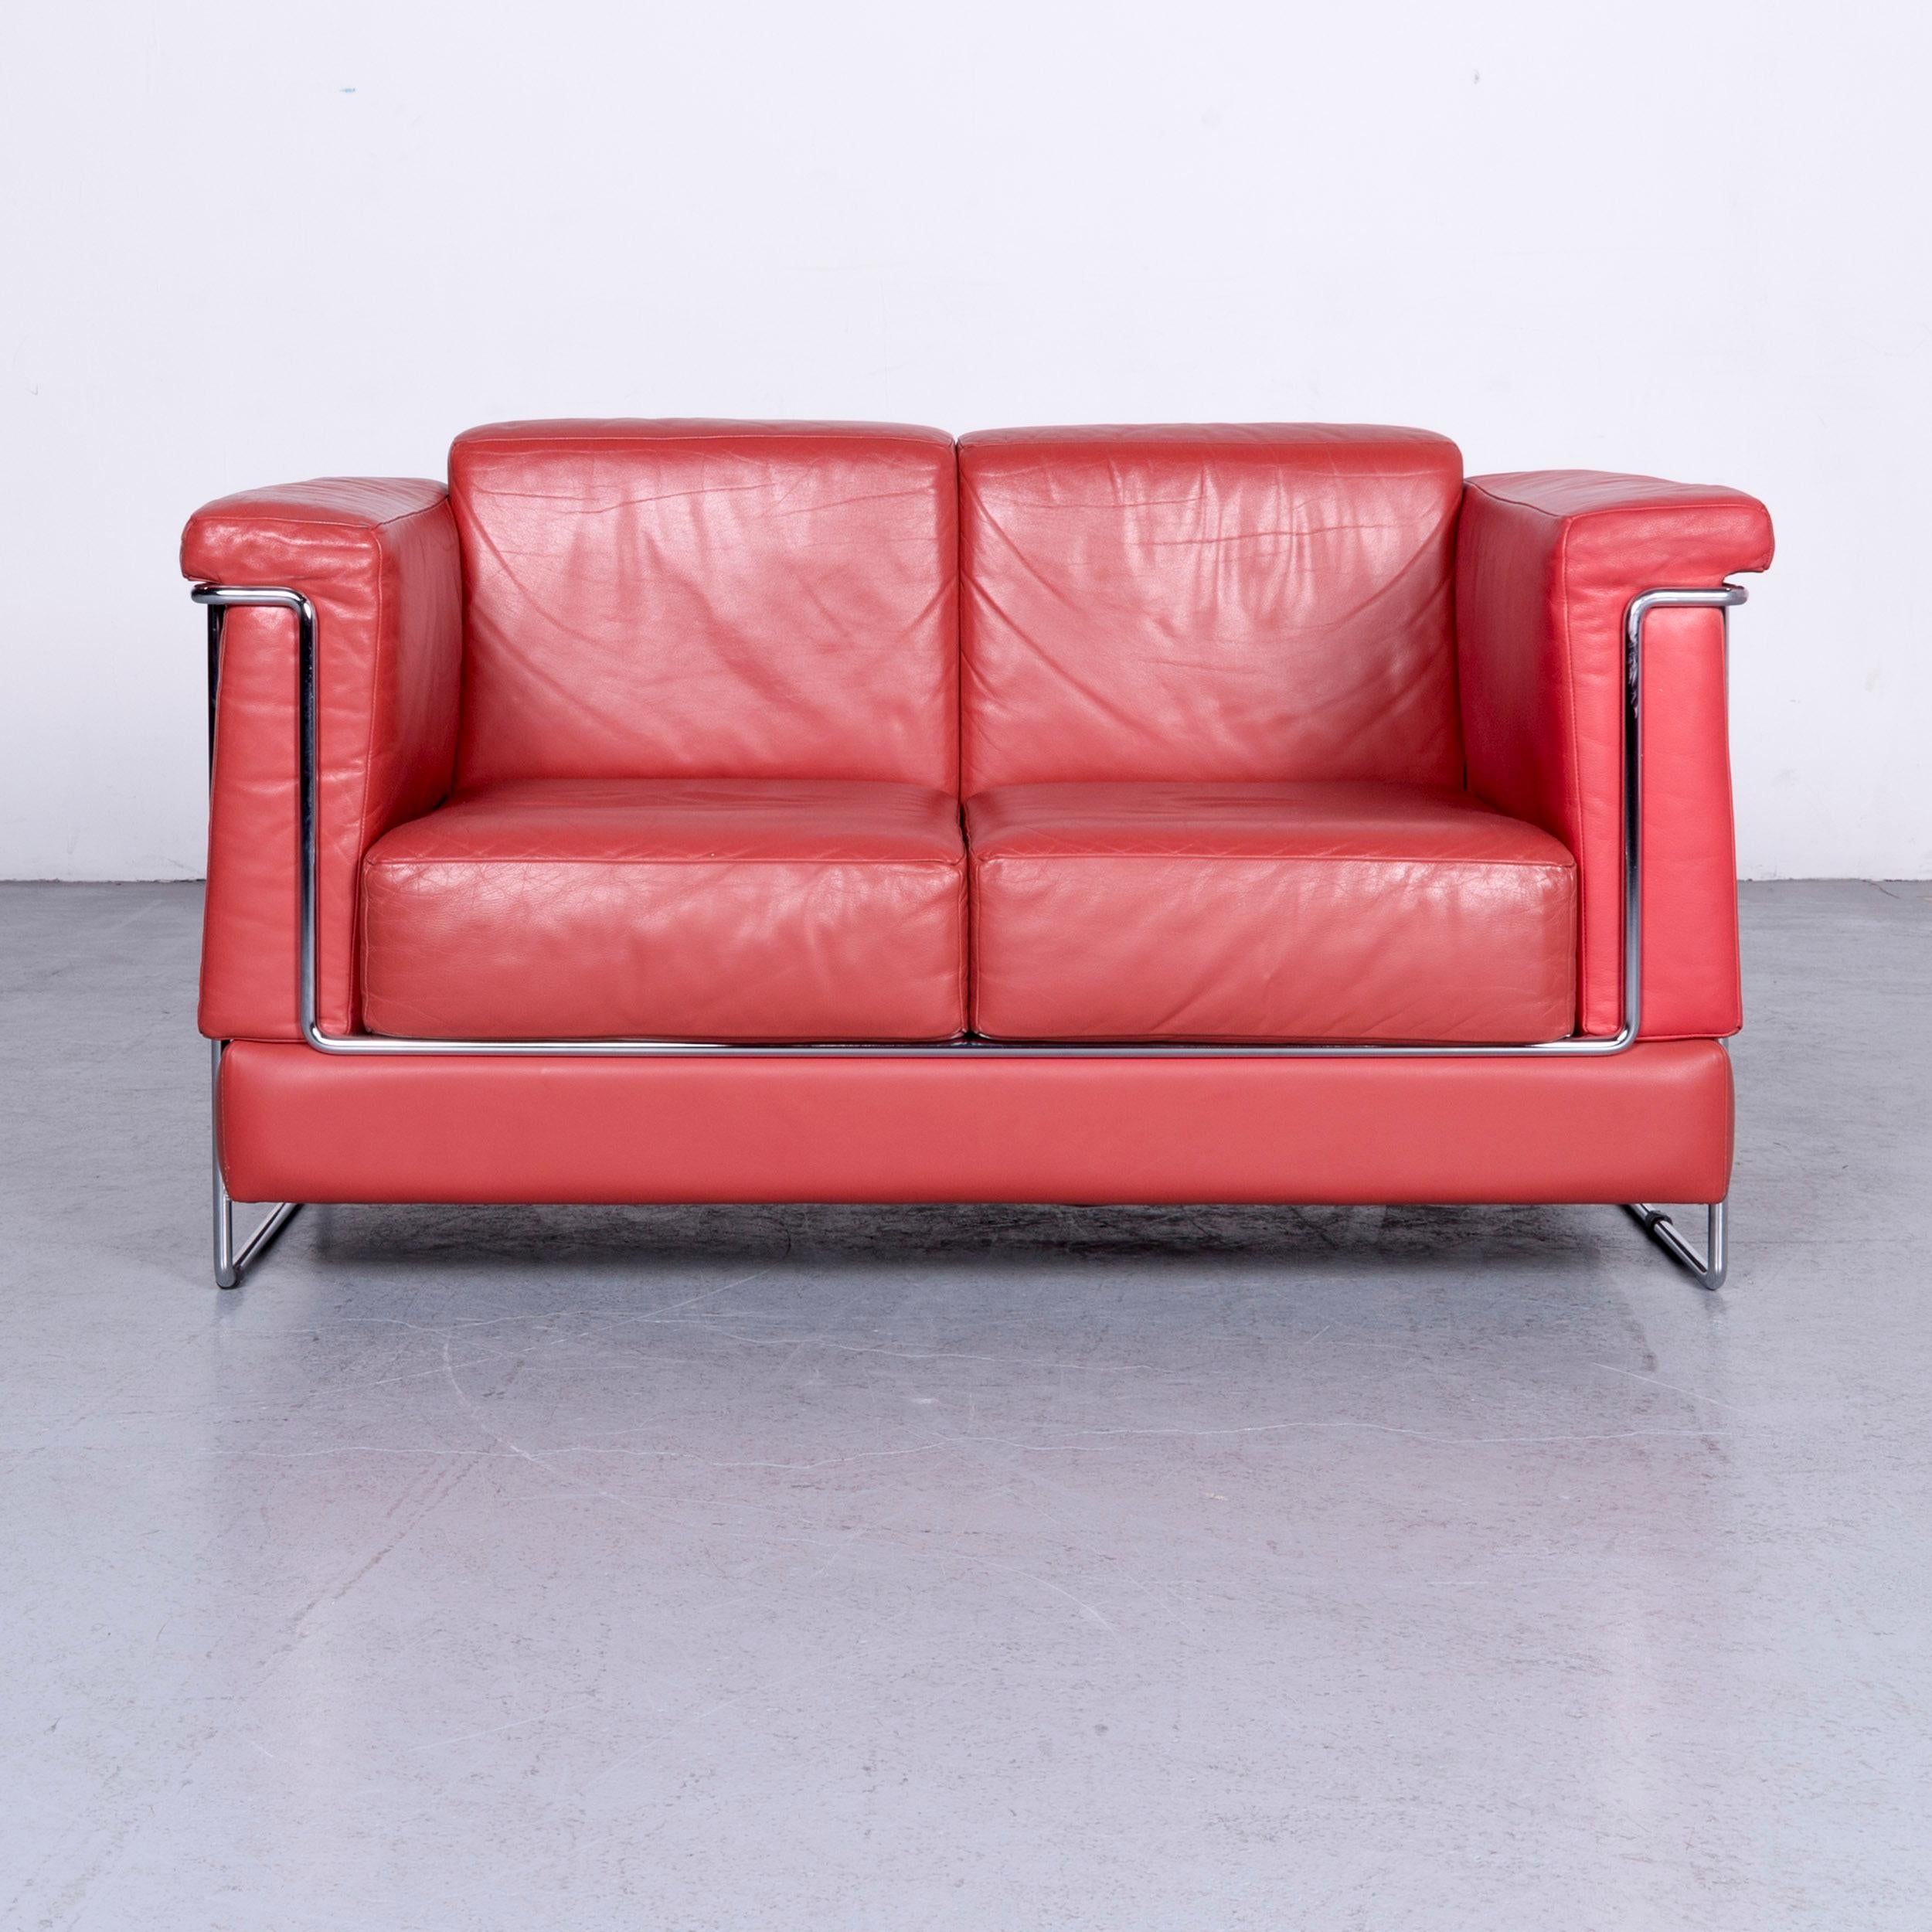 We bring to you a Züco Carat designer leather sofa set red two-seat couch.